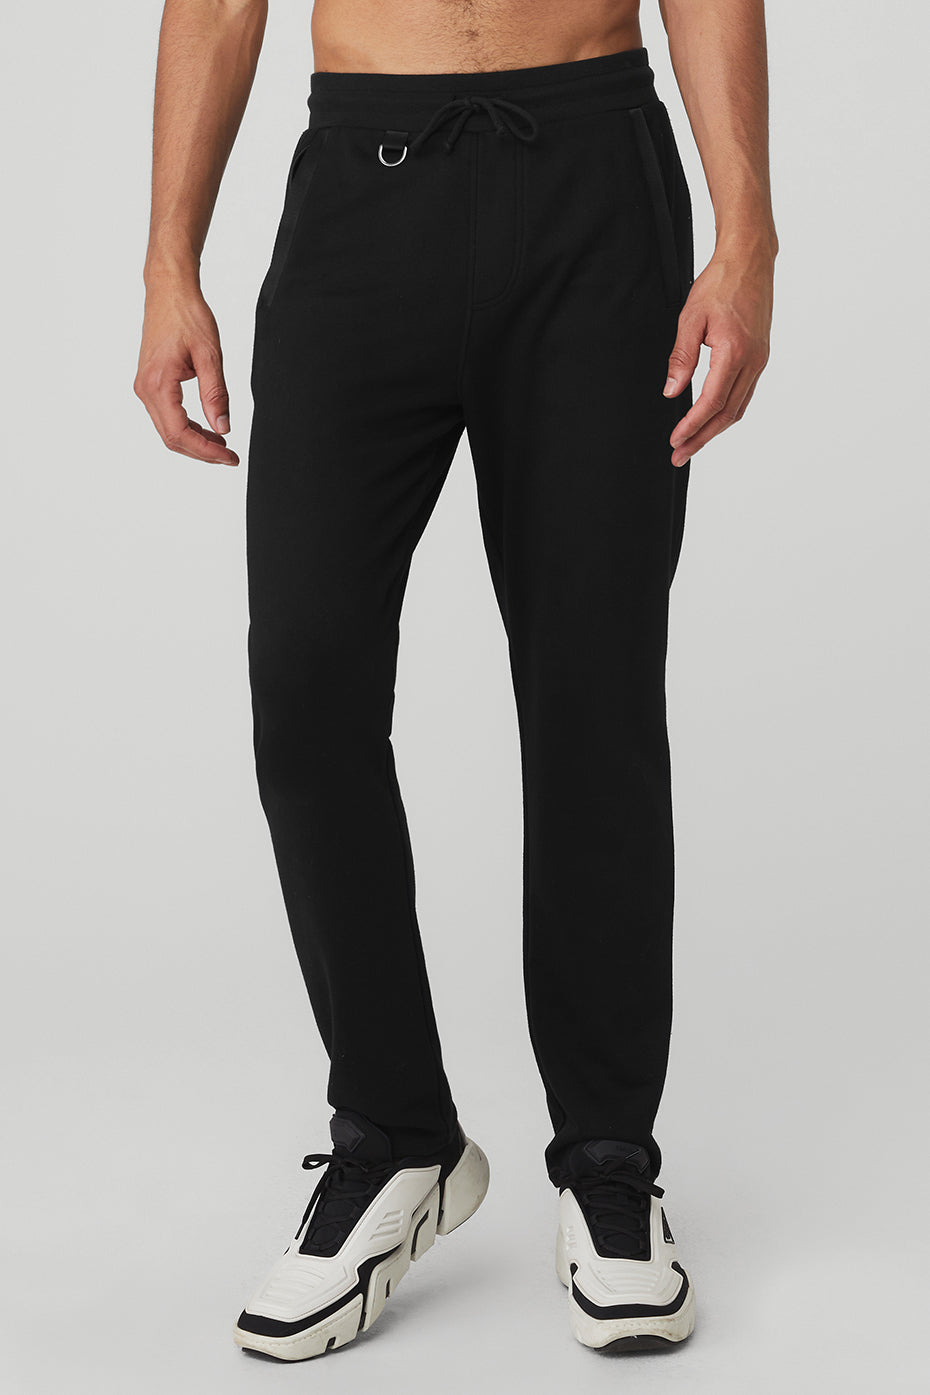 Alo Yoga Men's Warrior Compression Pant - Moisture Wicking and Comfortable  Fit